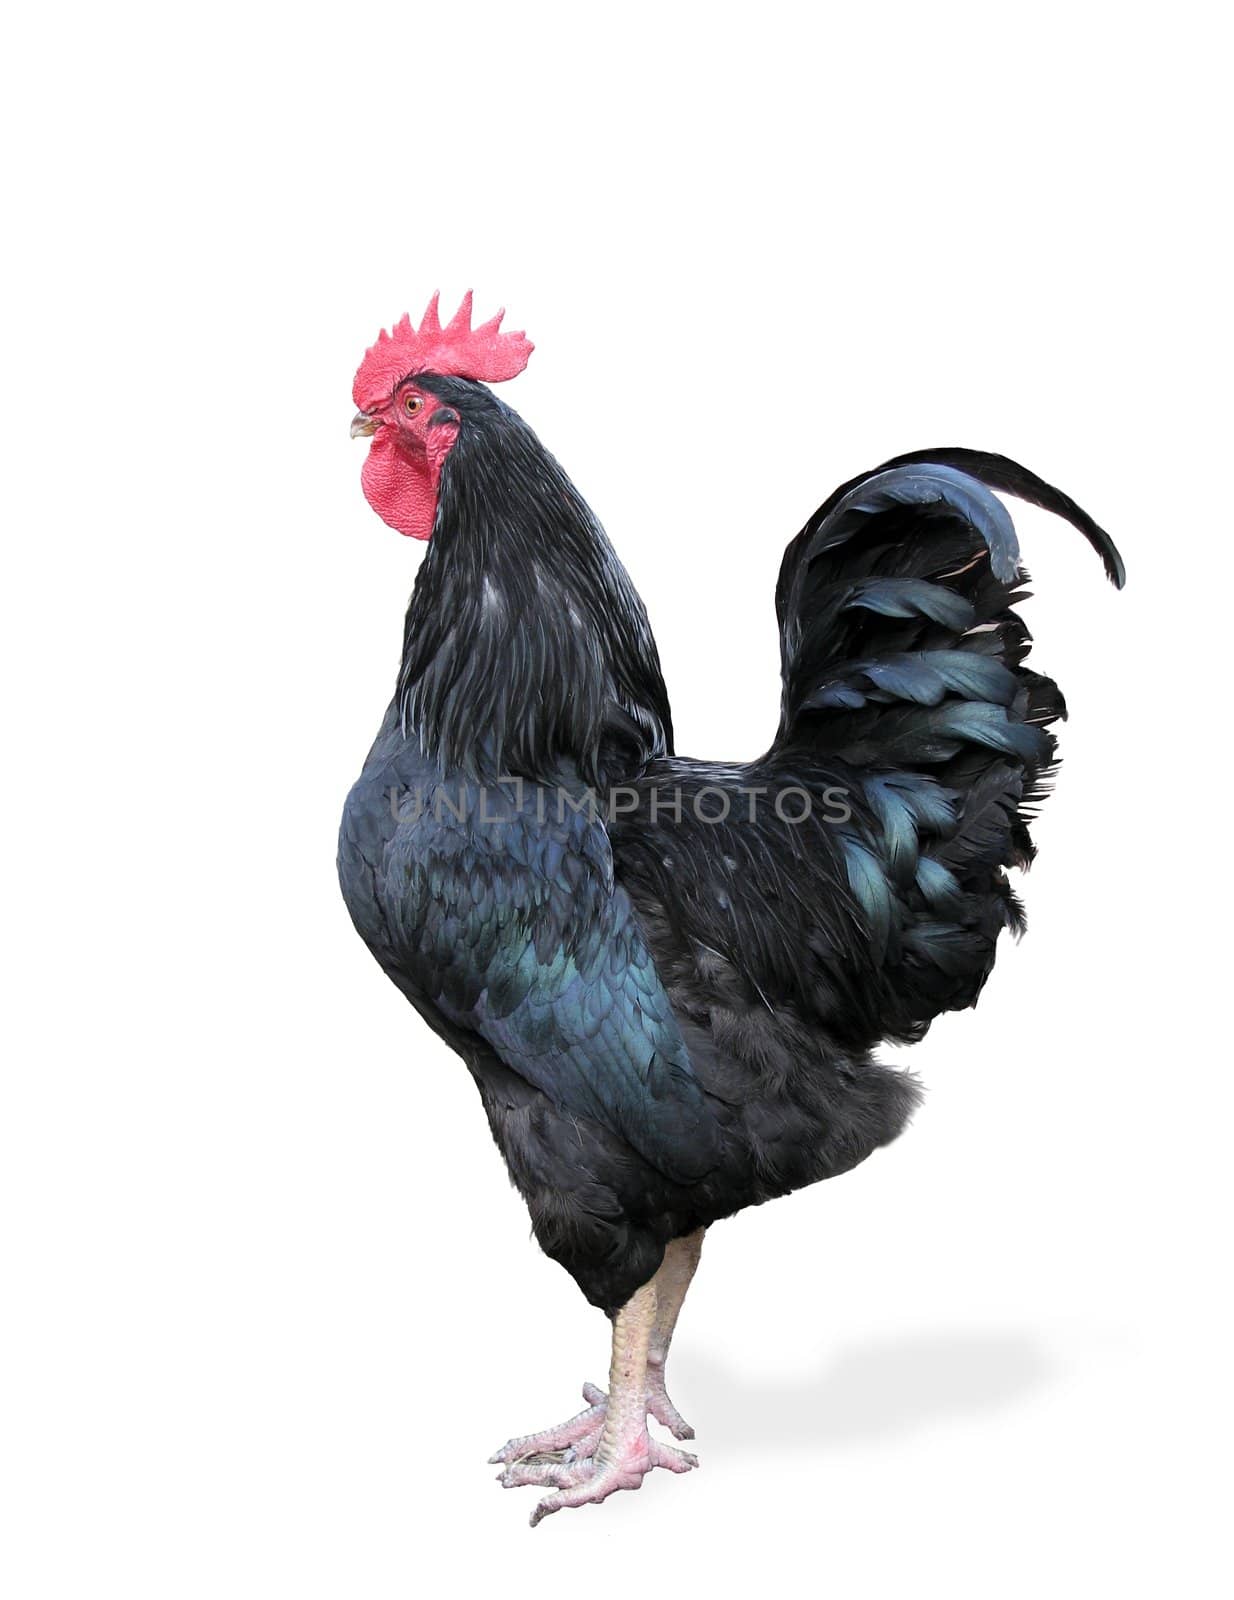 The black rooster on a white background by Svetovid